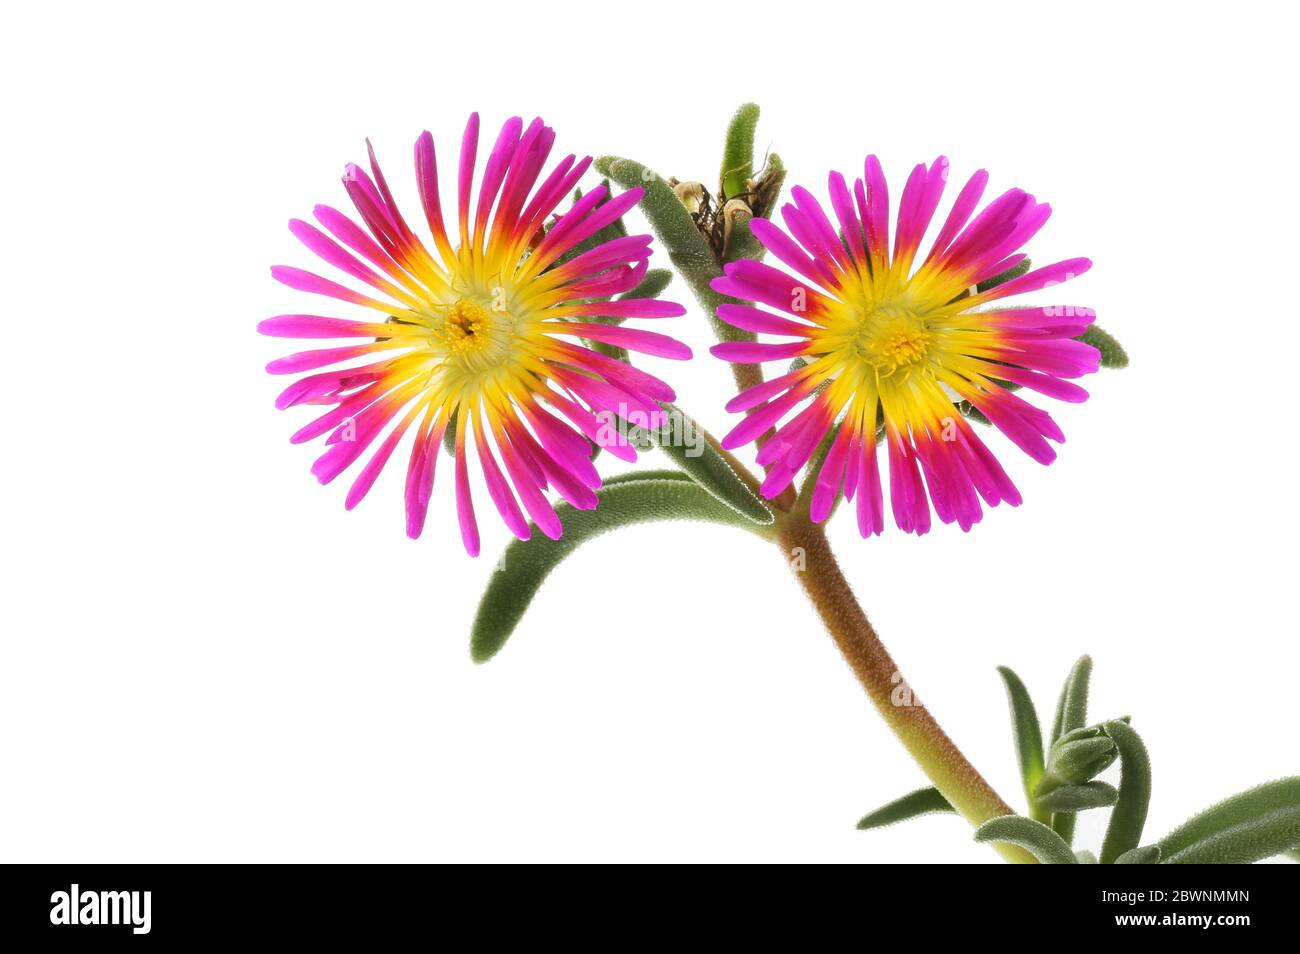 Two purple and yellow delosperma flowers and foliage isolated against white Stock Photo